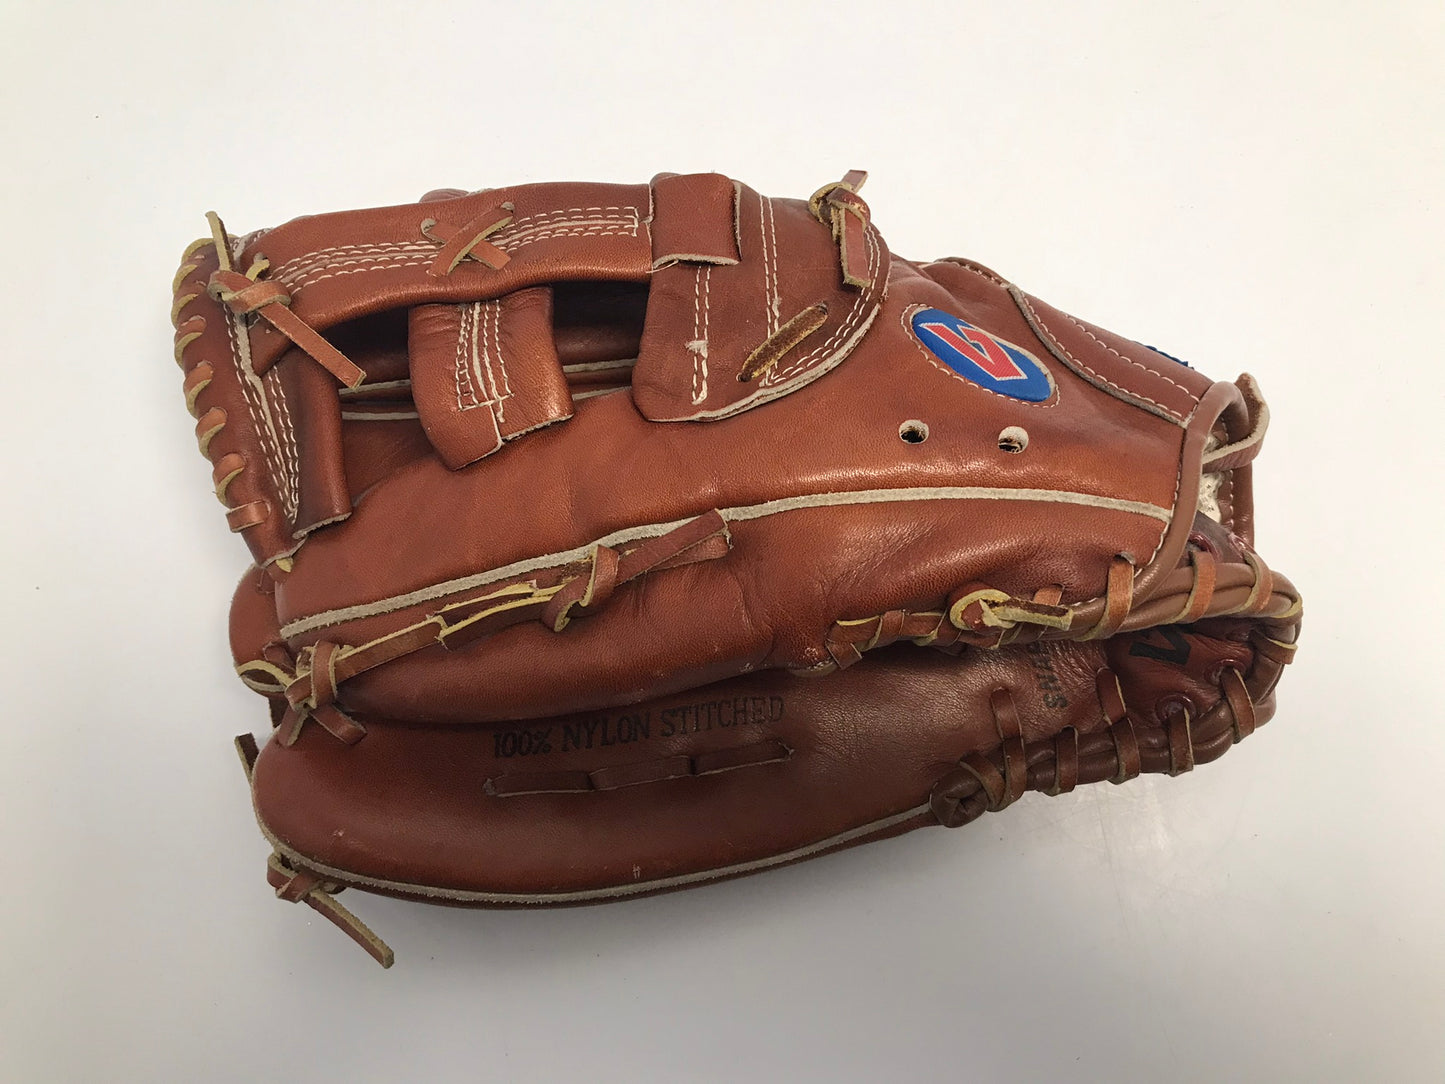 Baseball Glove Adult Size 12.5 Inches Leather Brown Fits On Right Hand Excellent